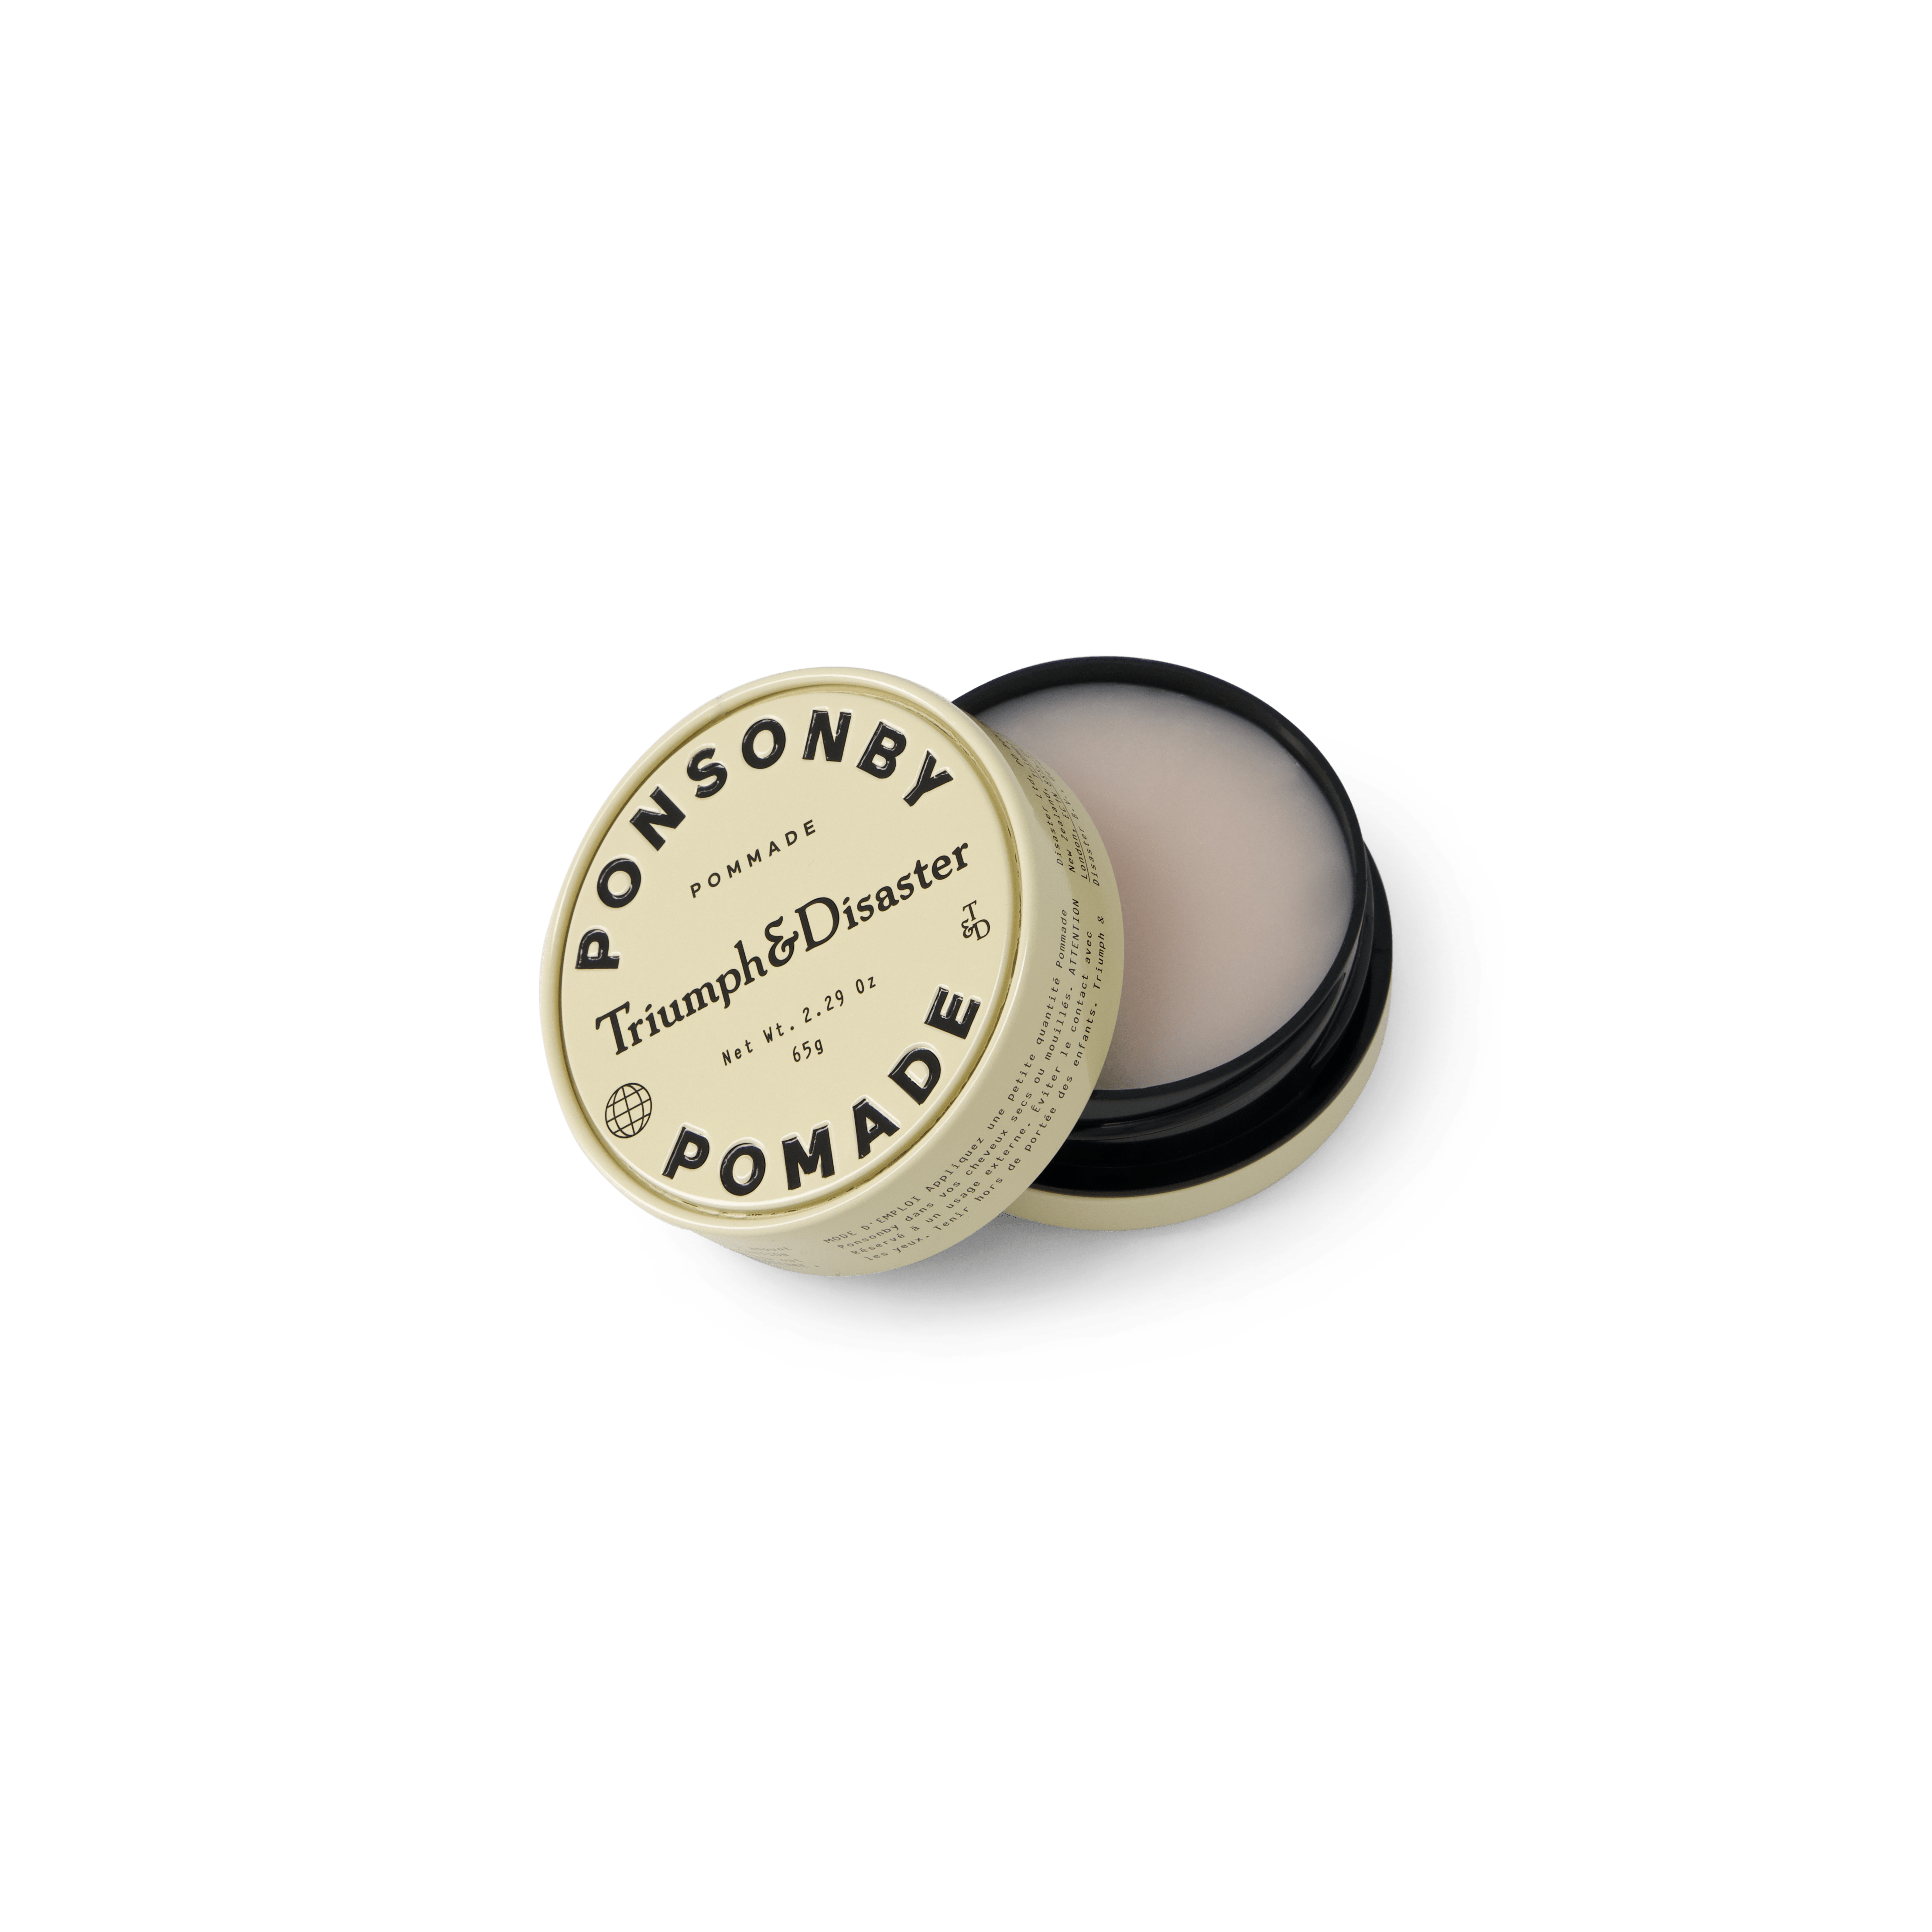 Ponsonby Pomade by Triumph & Disaster